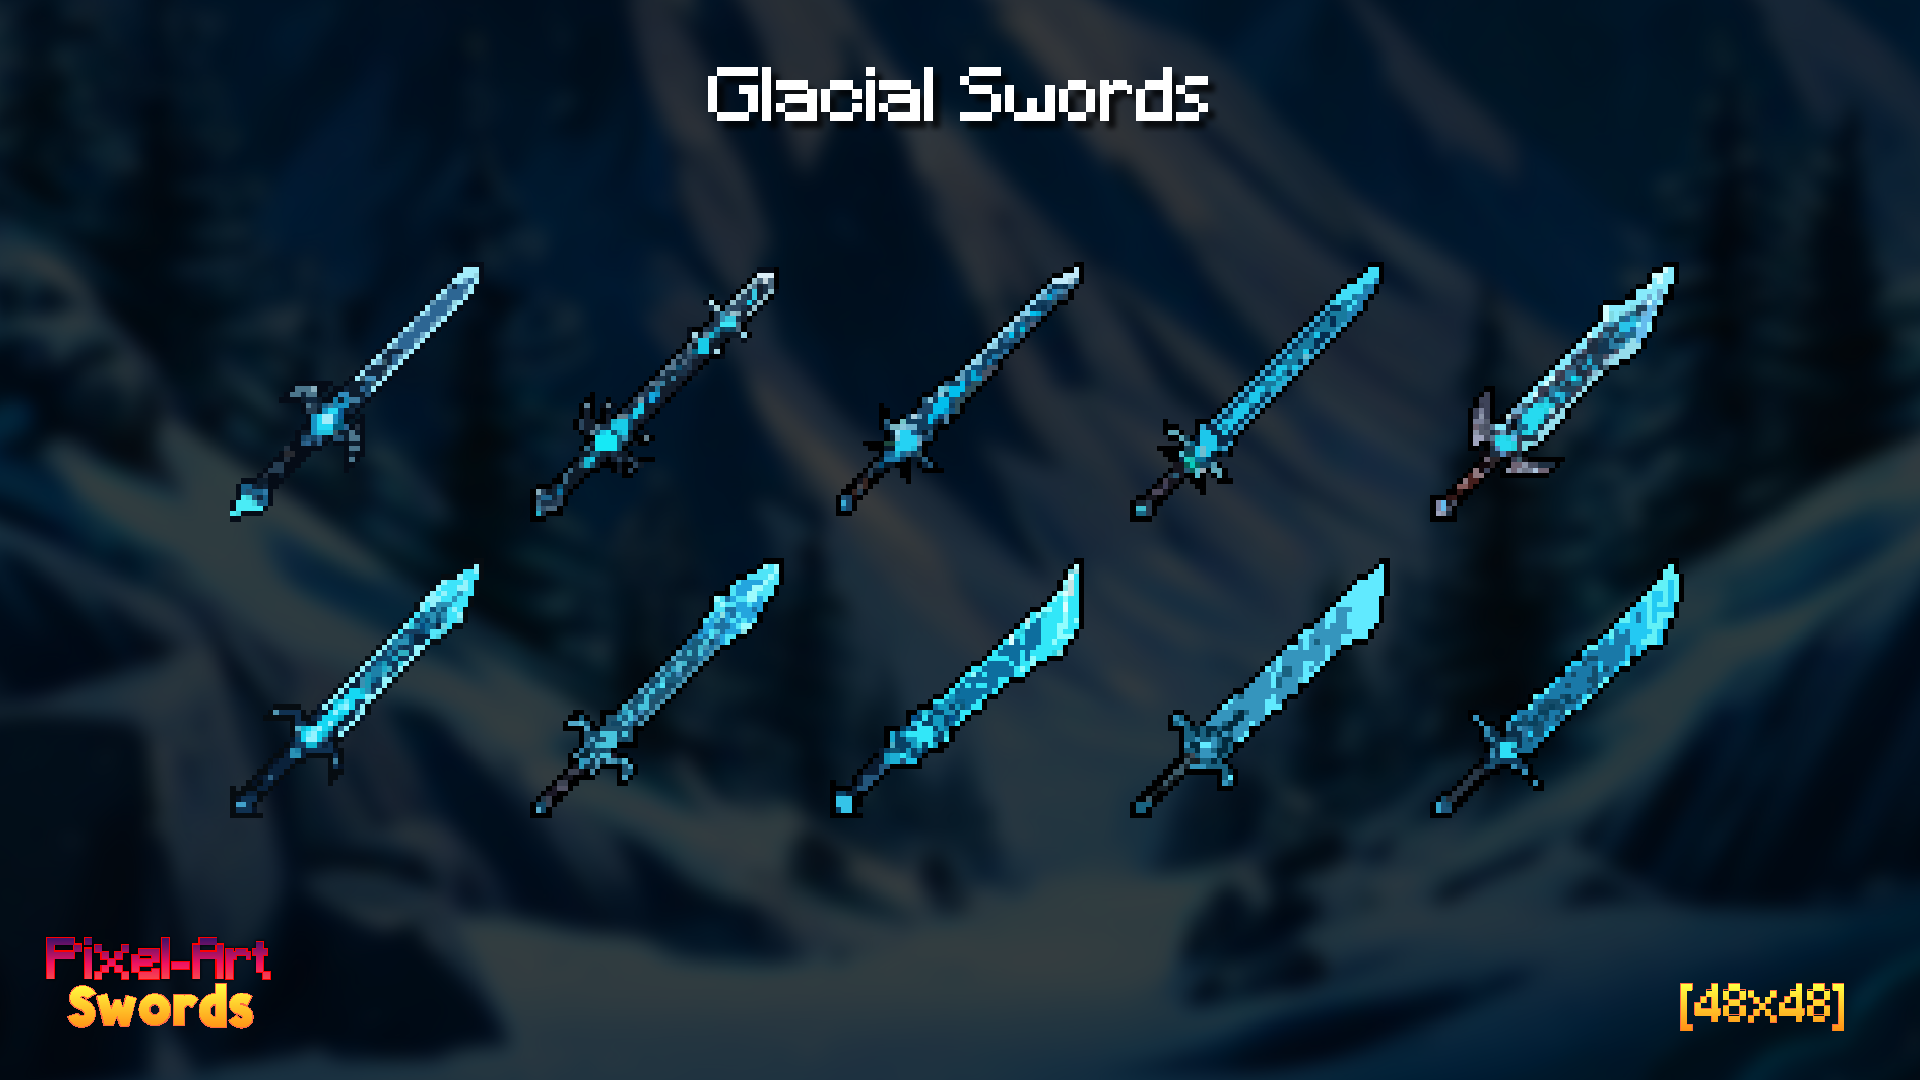 Pixel-Art Swords [48x48] by King Game Assets